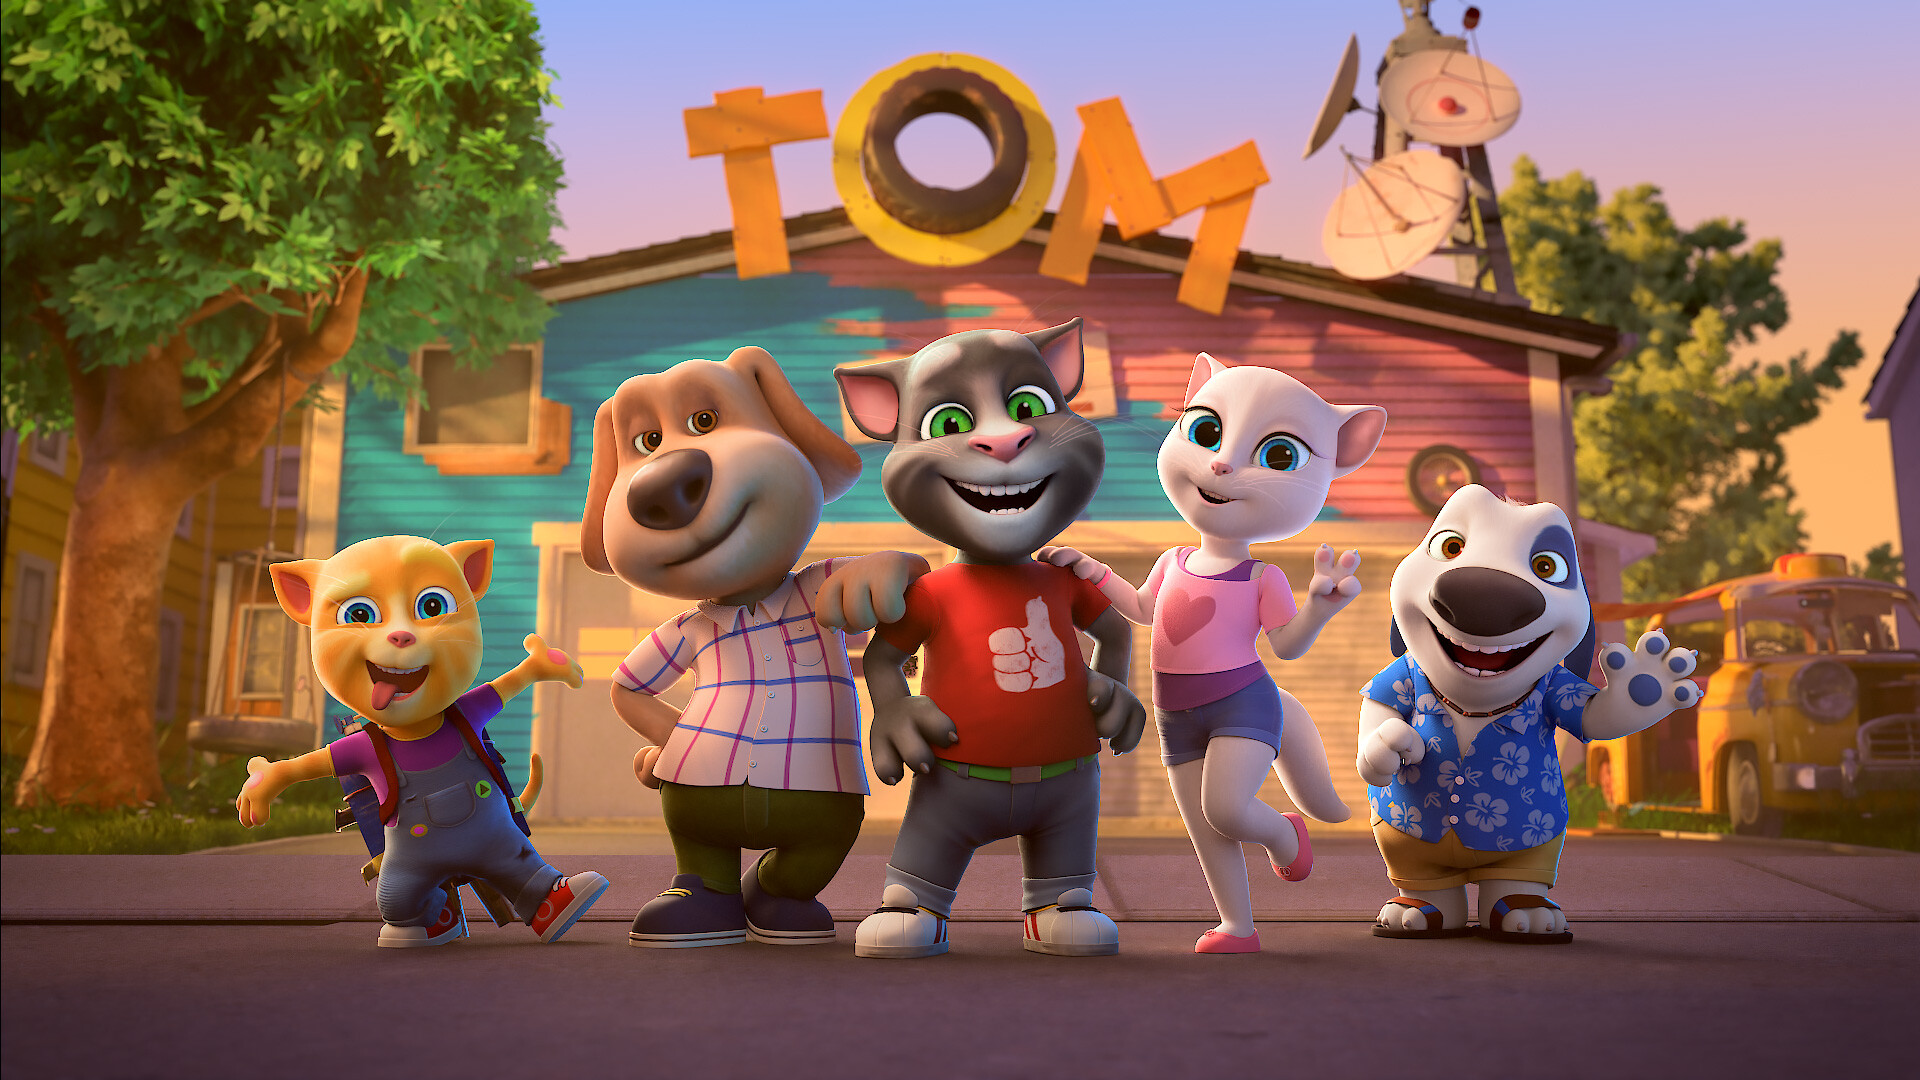 ArtStation - Talking Tom and Friends Animated Series